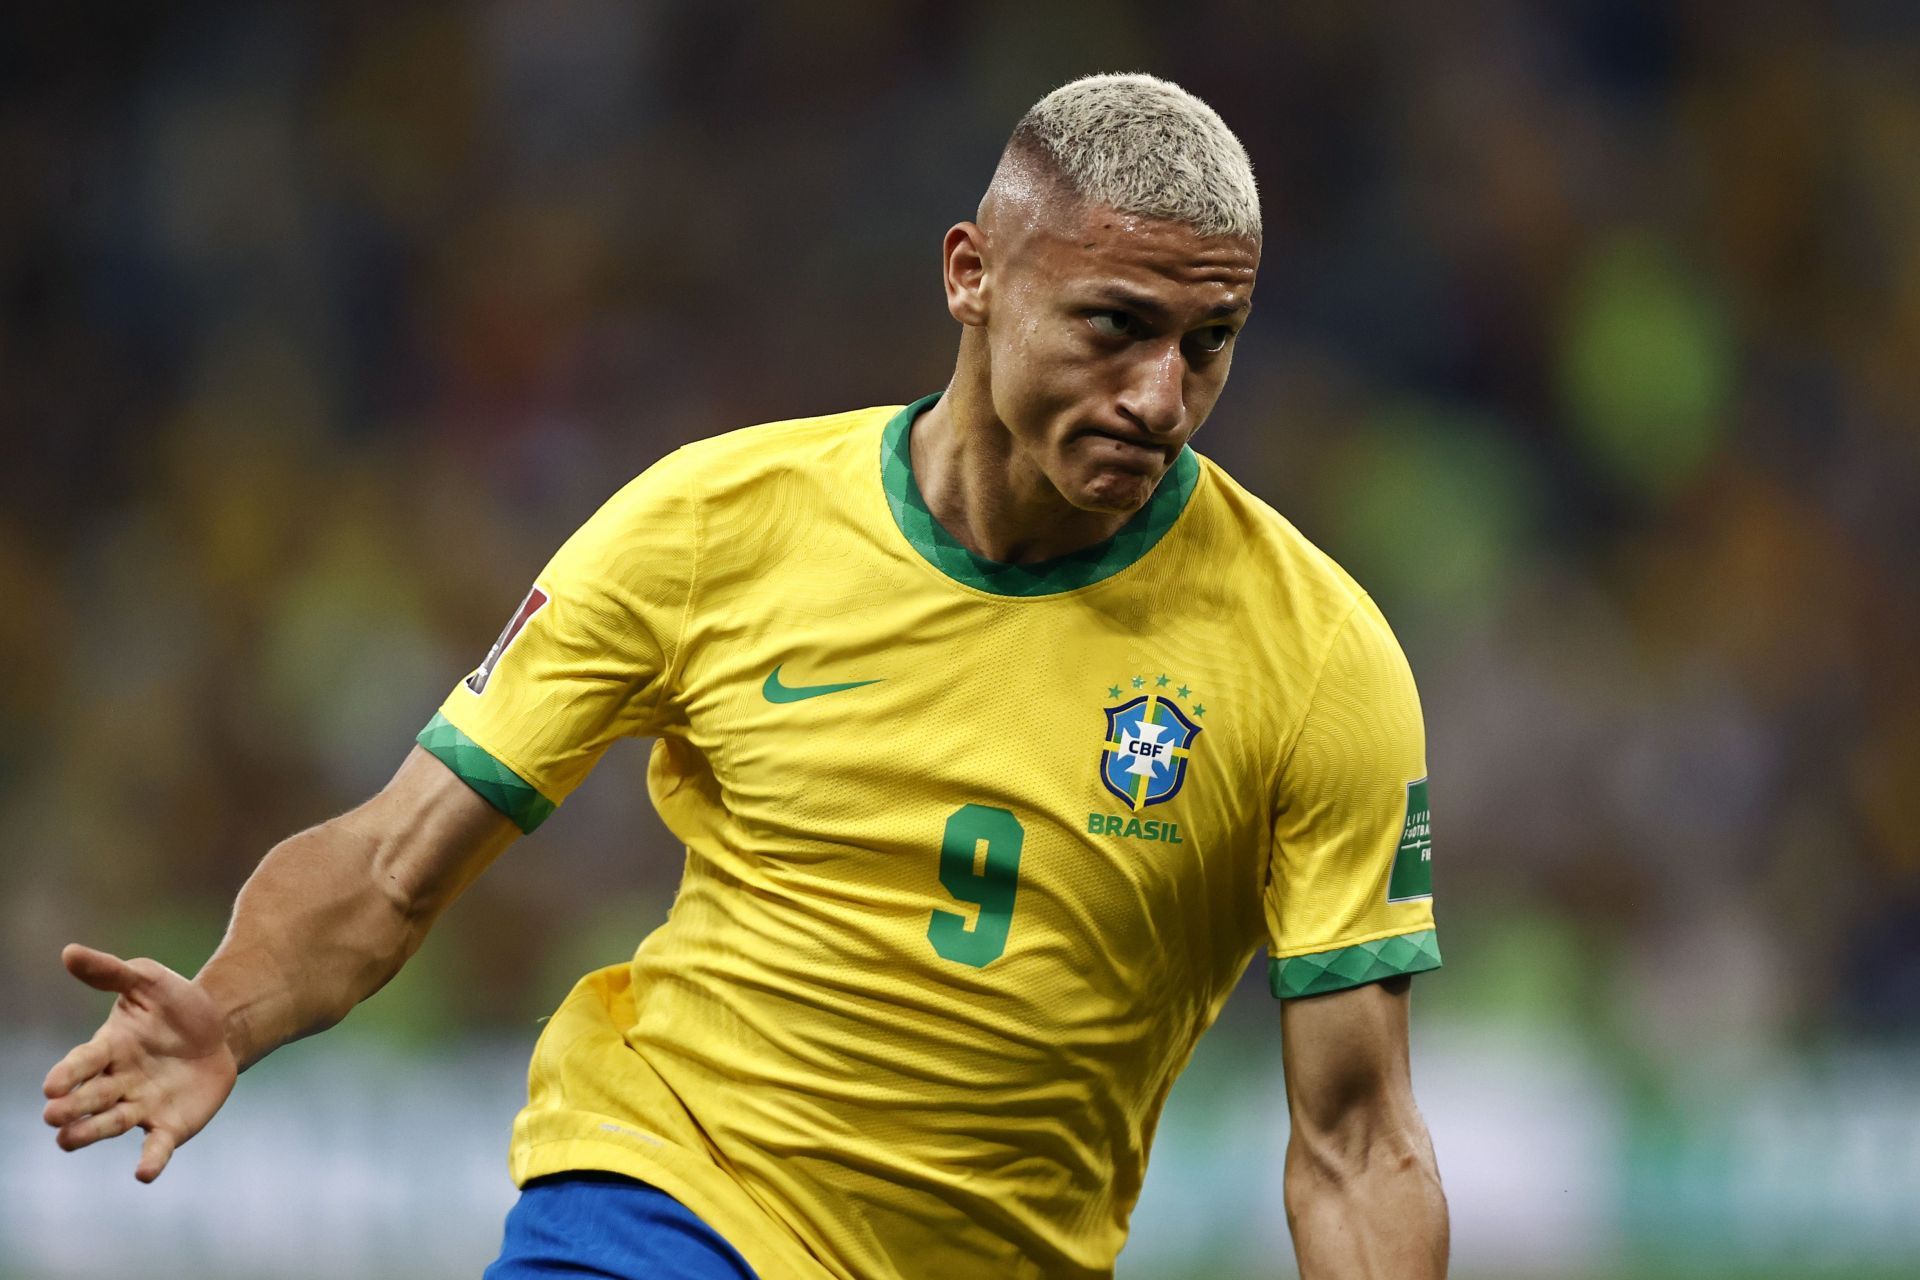 Richarlison continues to shine for Brazil